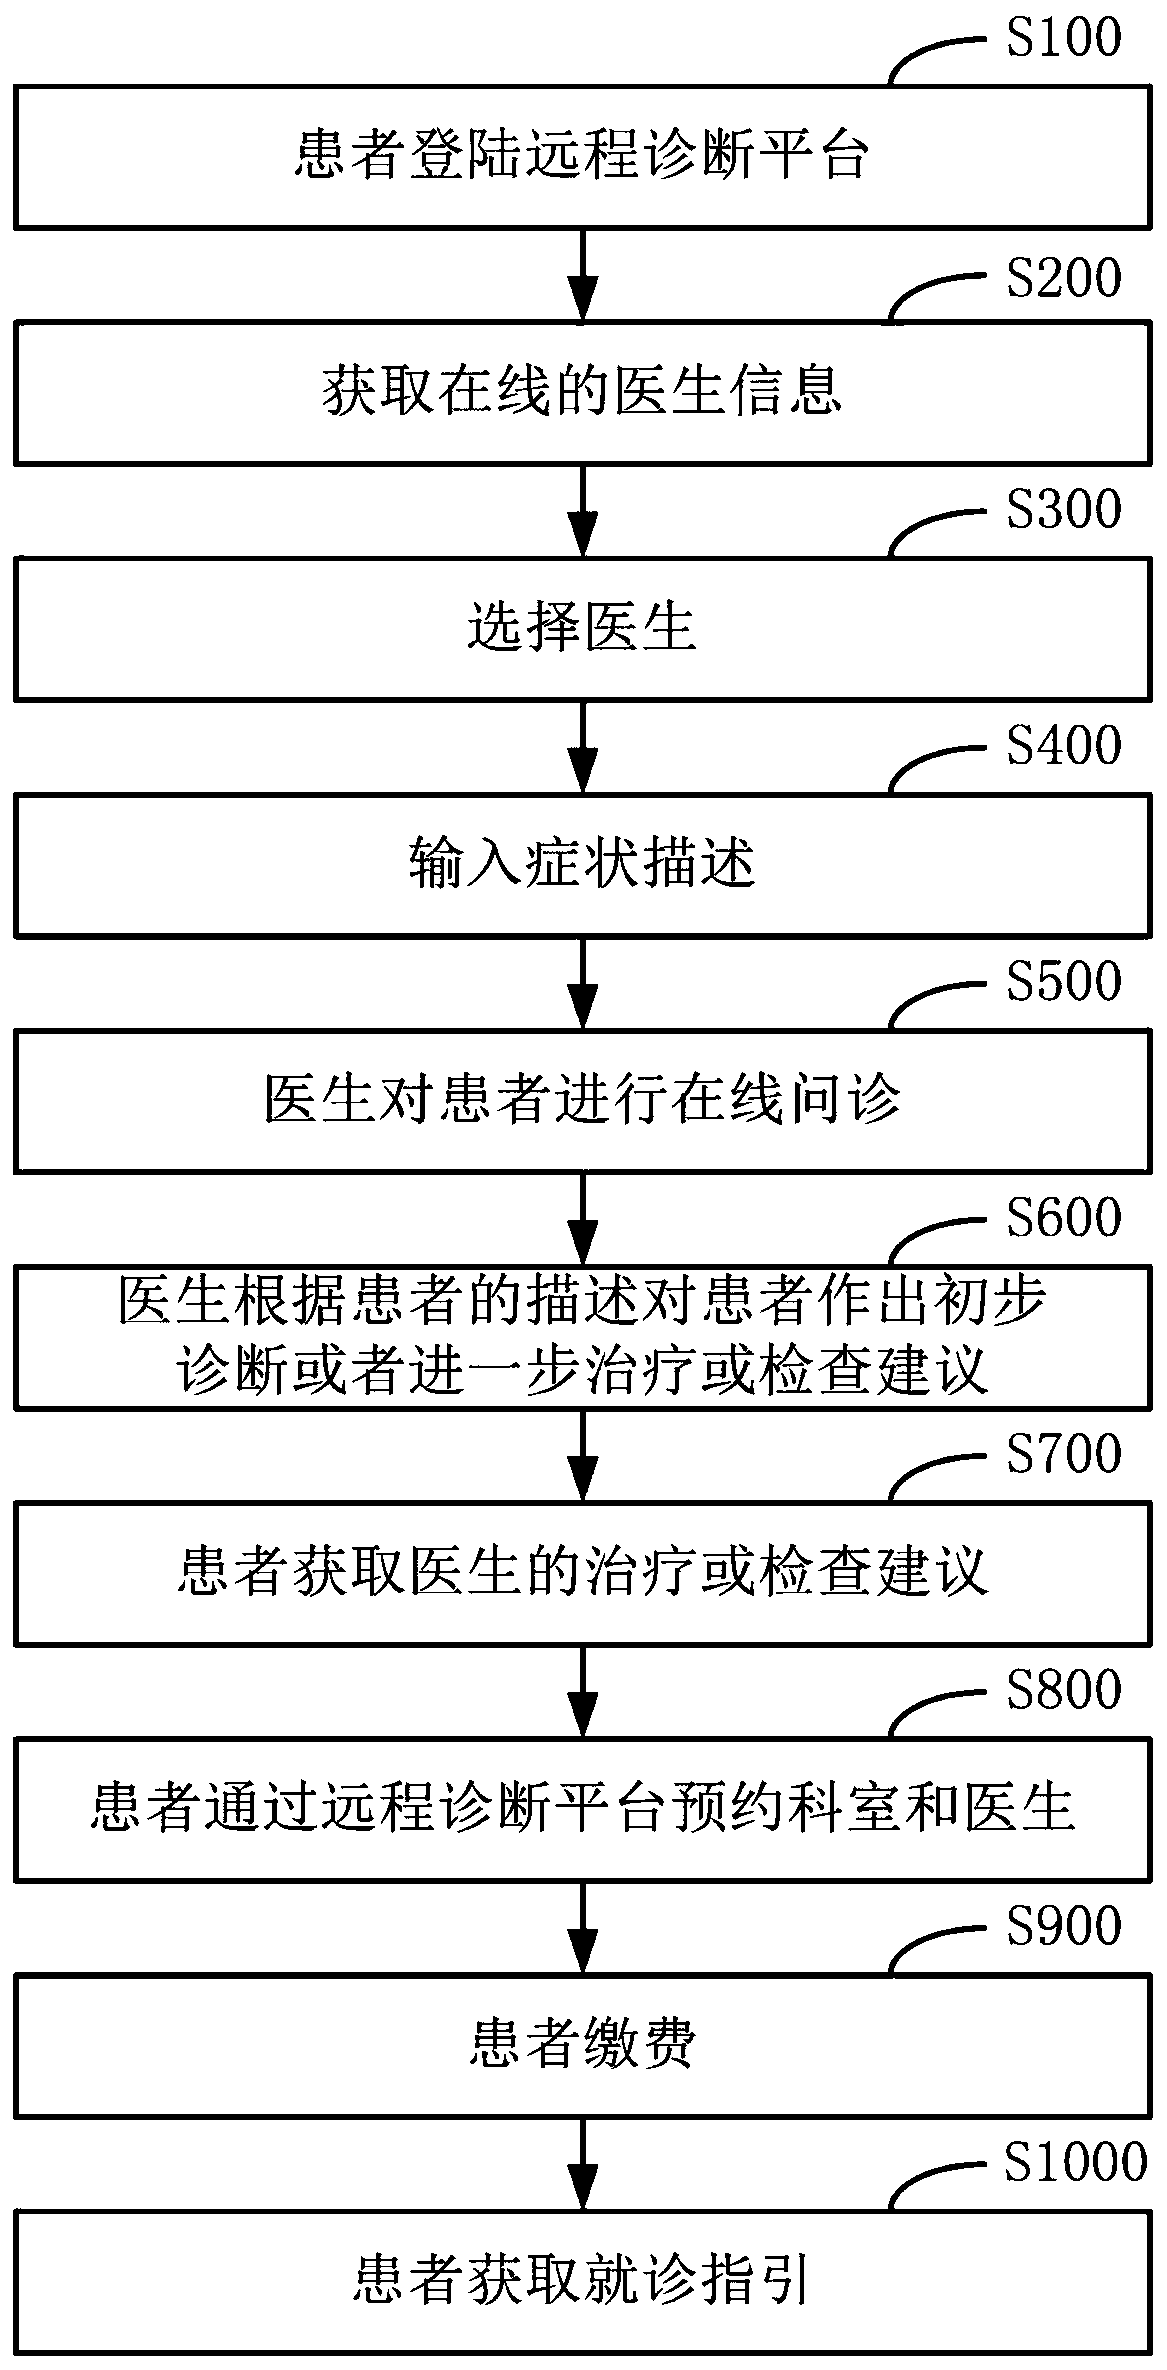 Remote diagnosis method, system and terminal